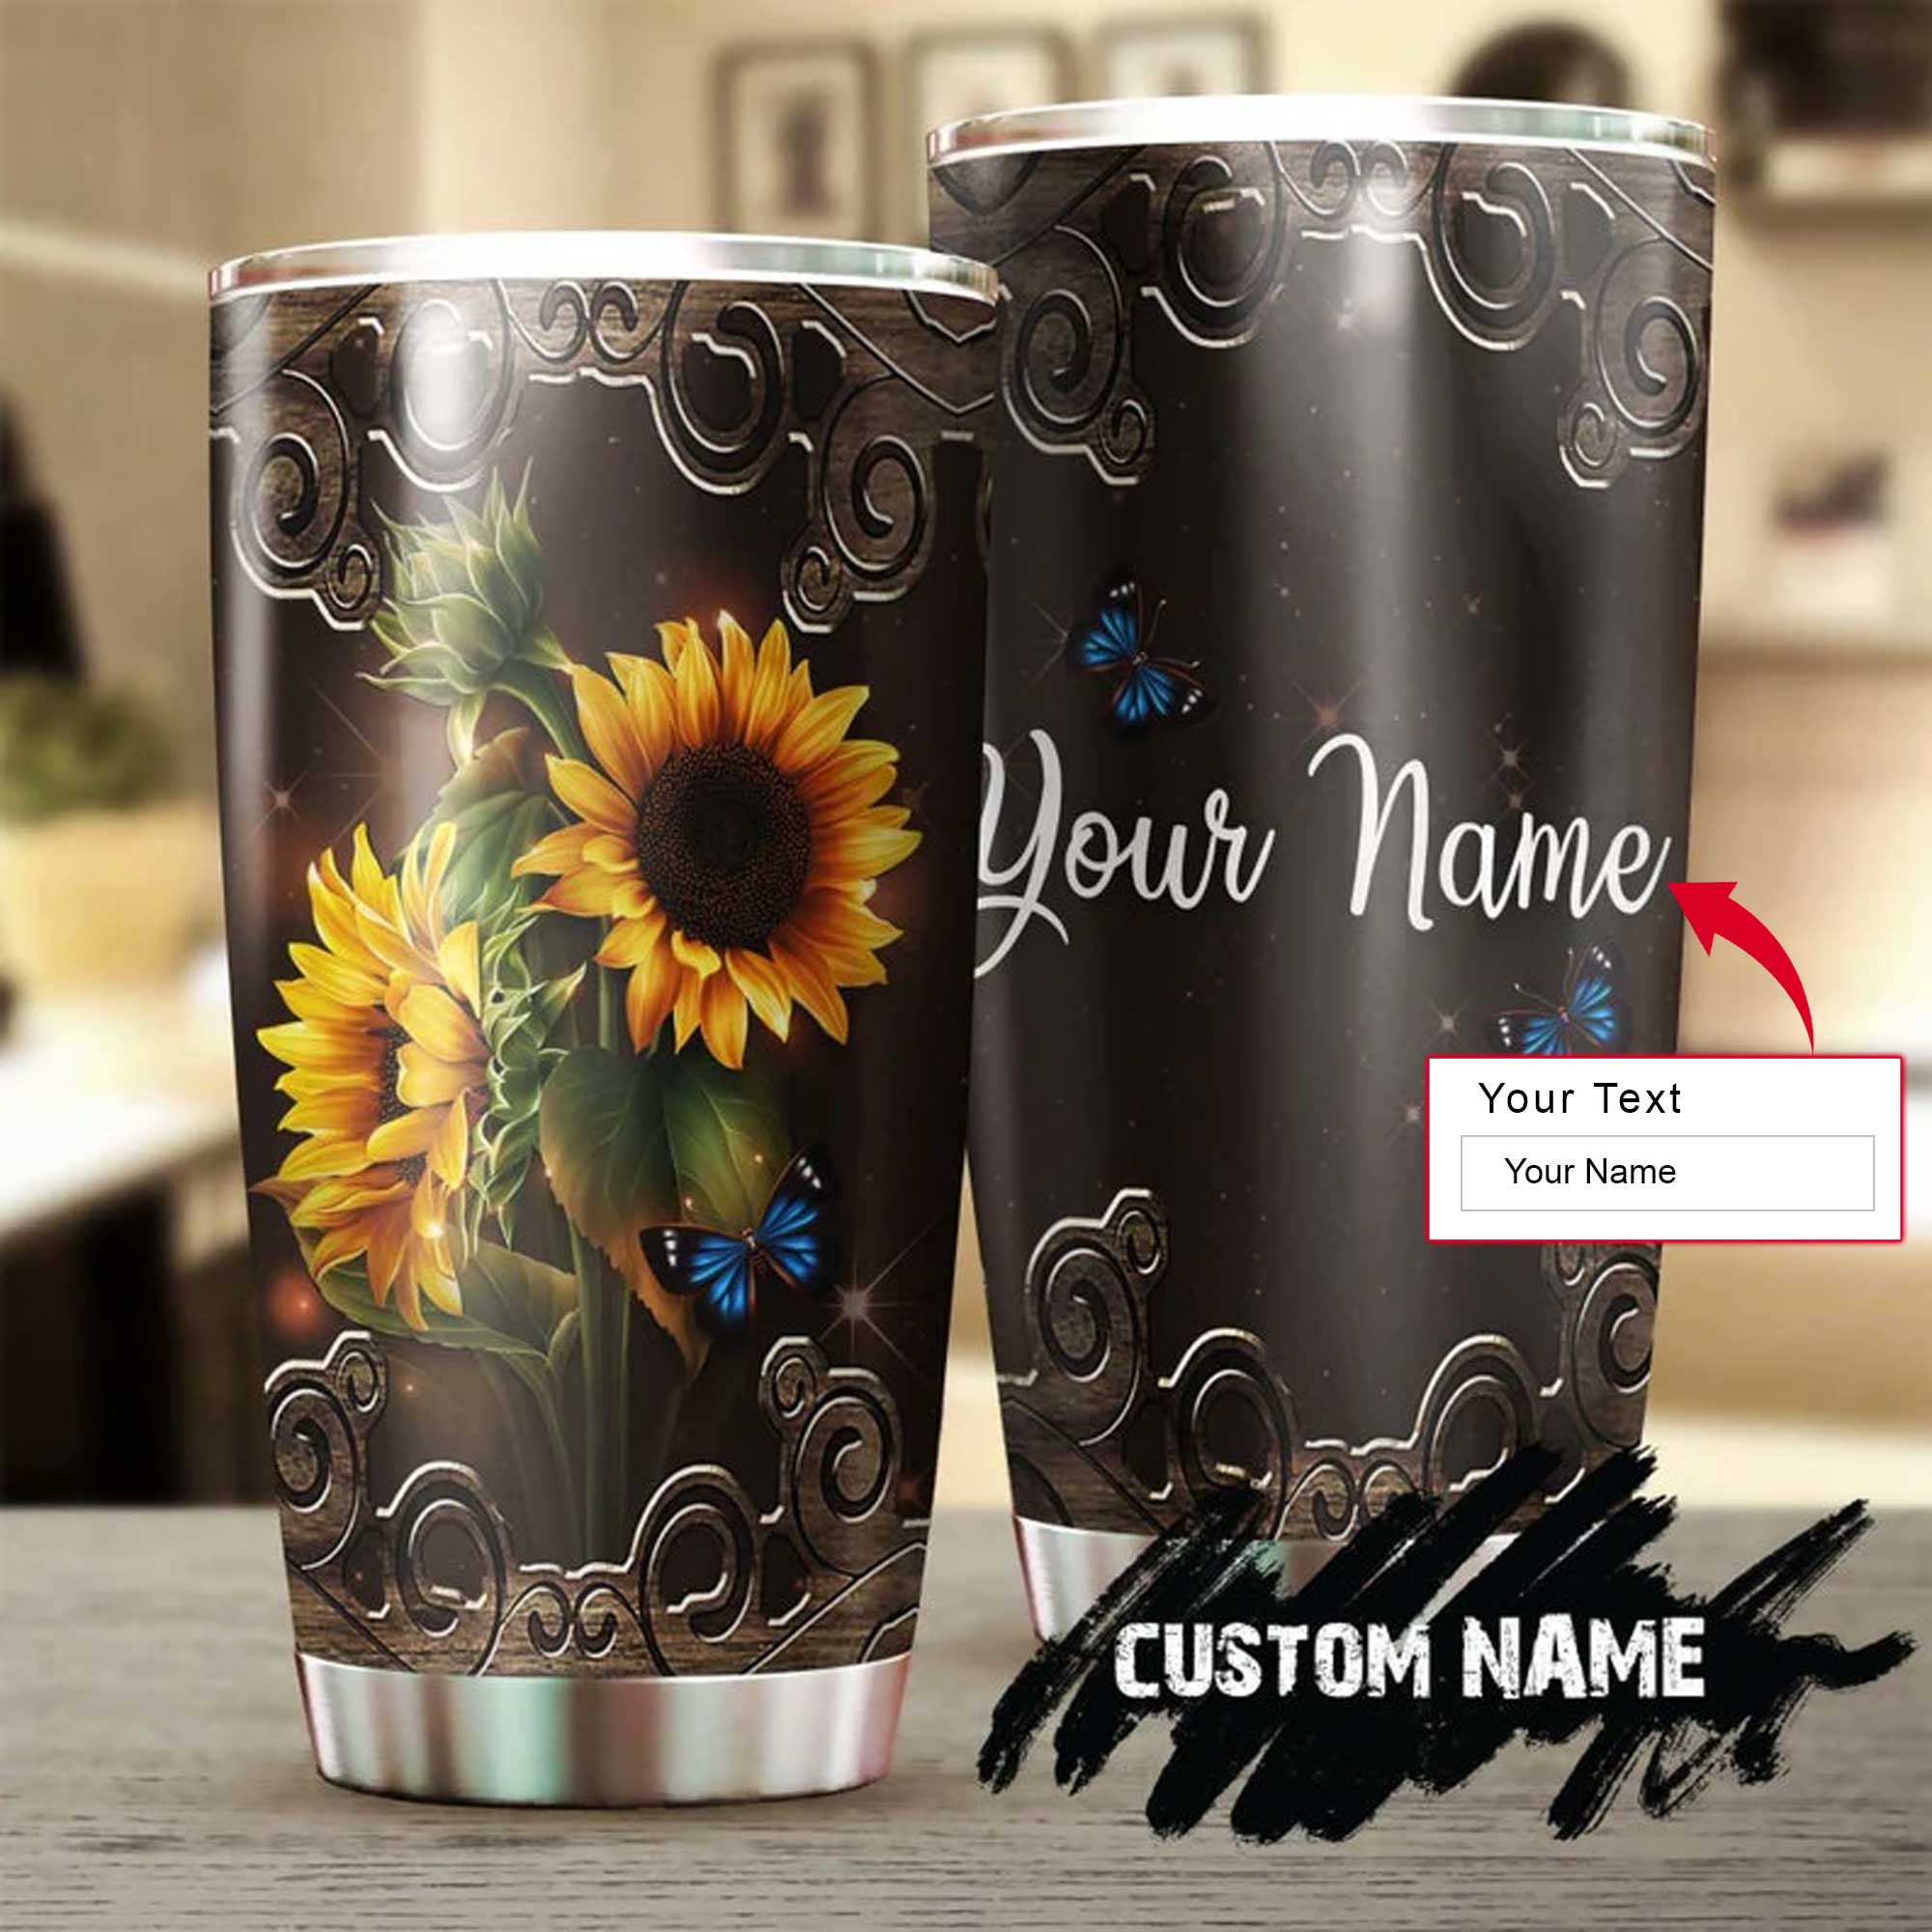 Personalized Mother's Day Gift Tumbler - Custom Gift For Mother's Day, Presents for Mom - Sunflower Vintage Classic Style Tumbler